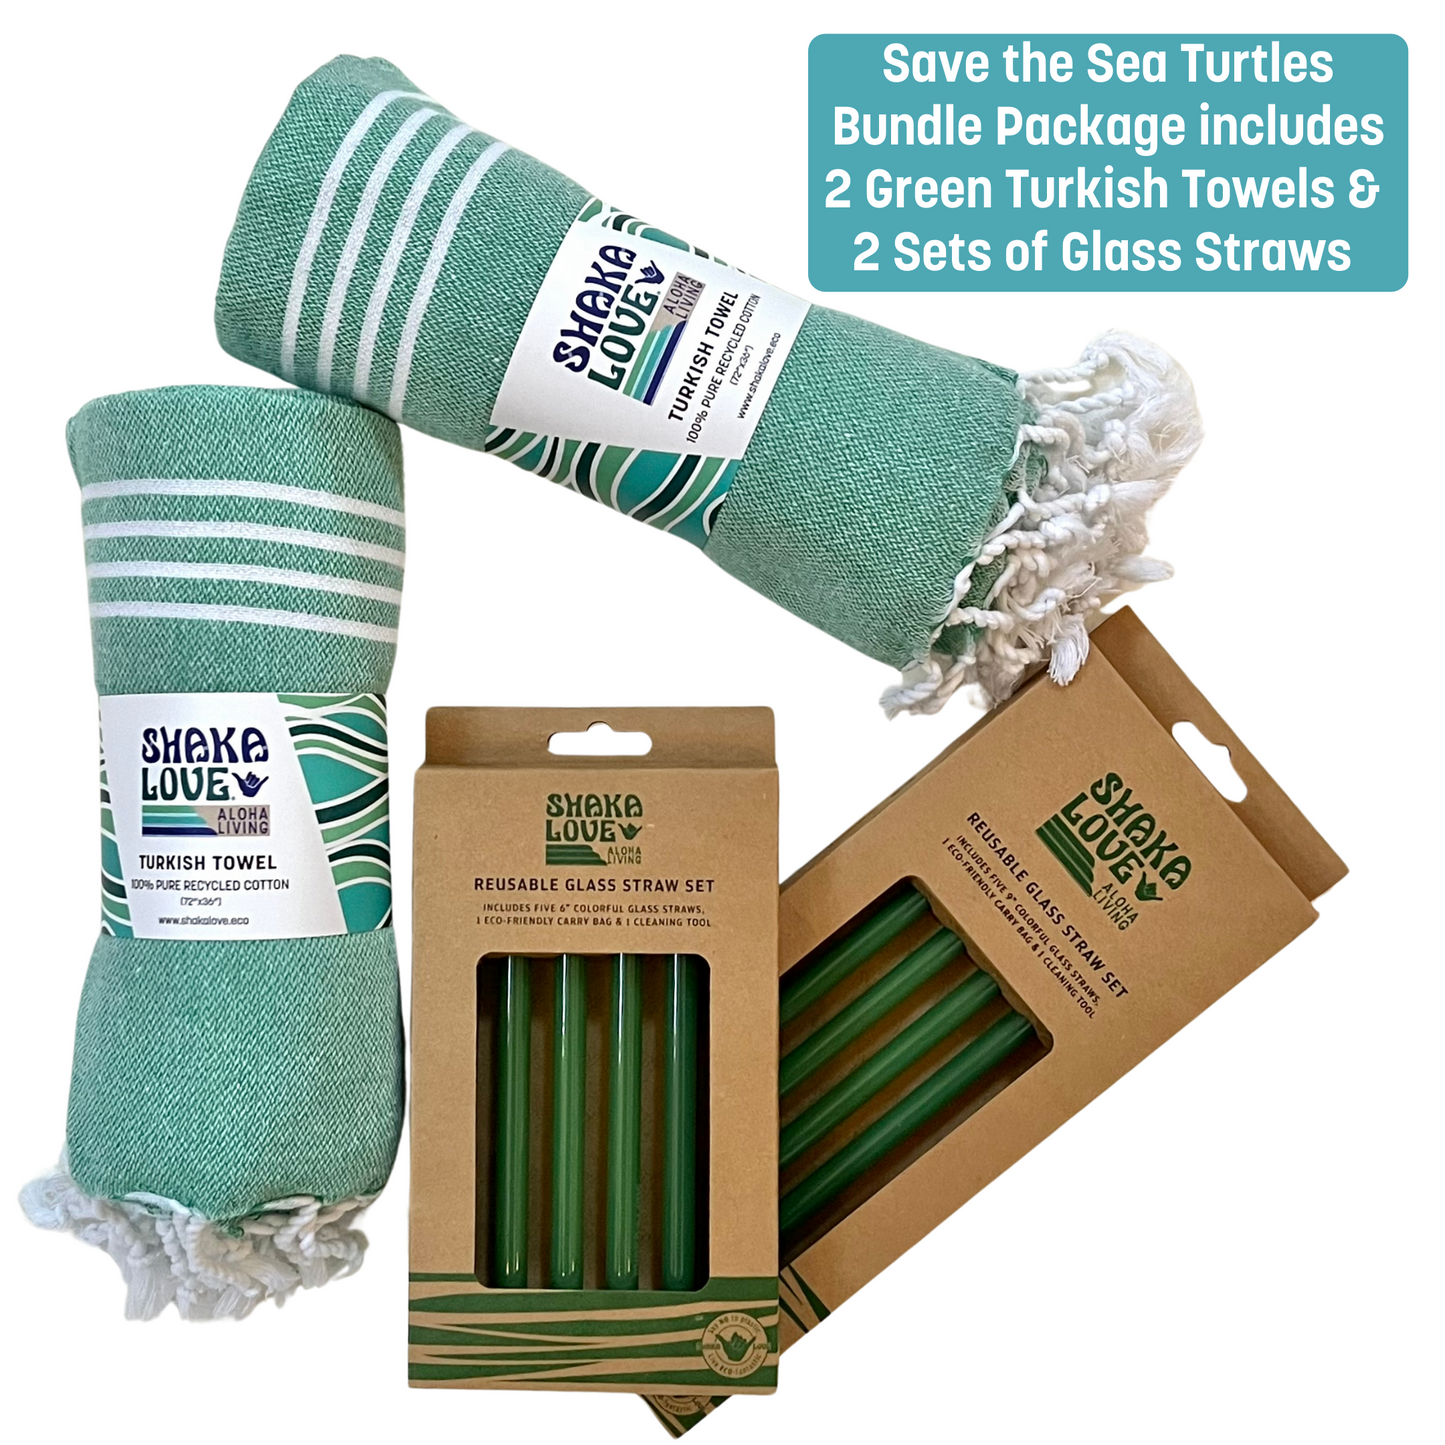 Save the Sea Turtles Bundle: 2 Green Towels & Two Sets of Glass Straws